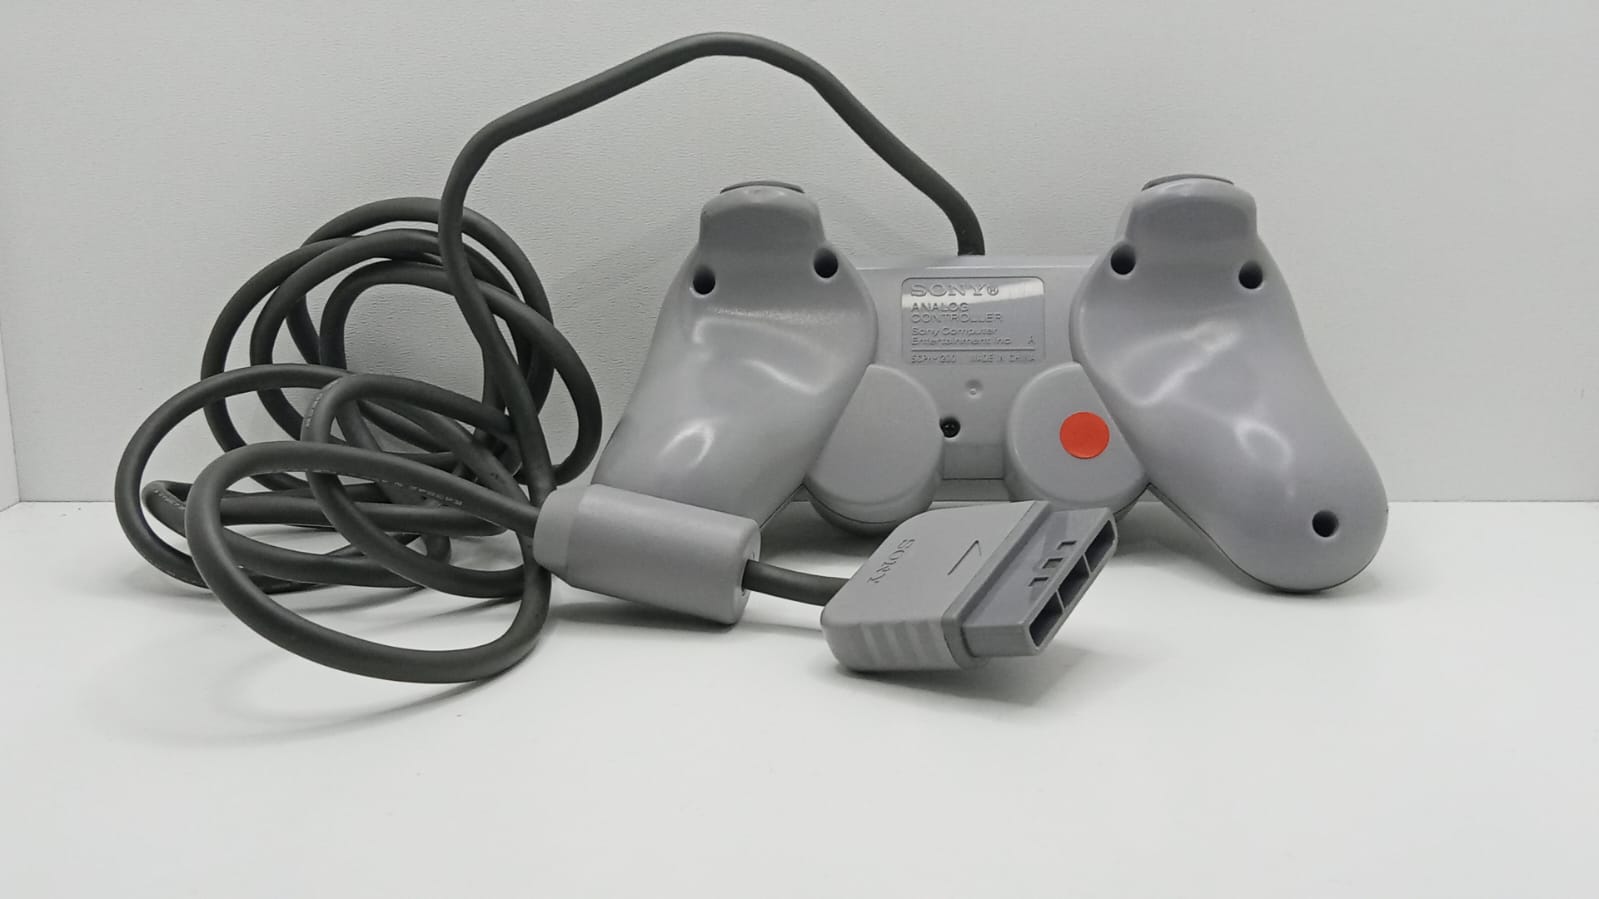 Controller Dualshock  PlayStation 1 PS1 - SONY® - curatat si reconditionat